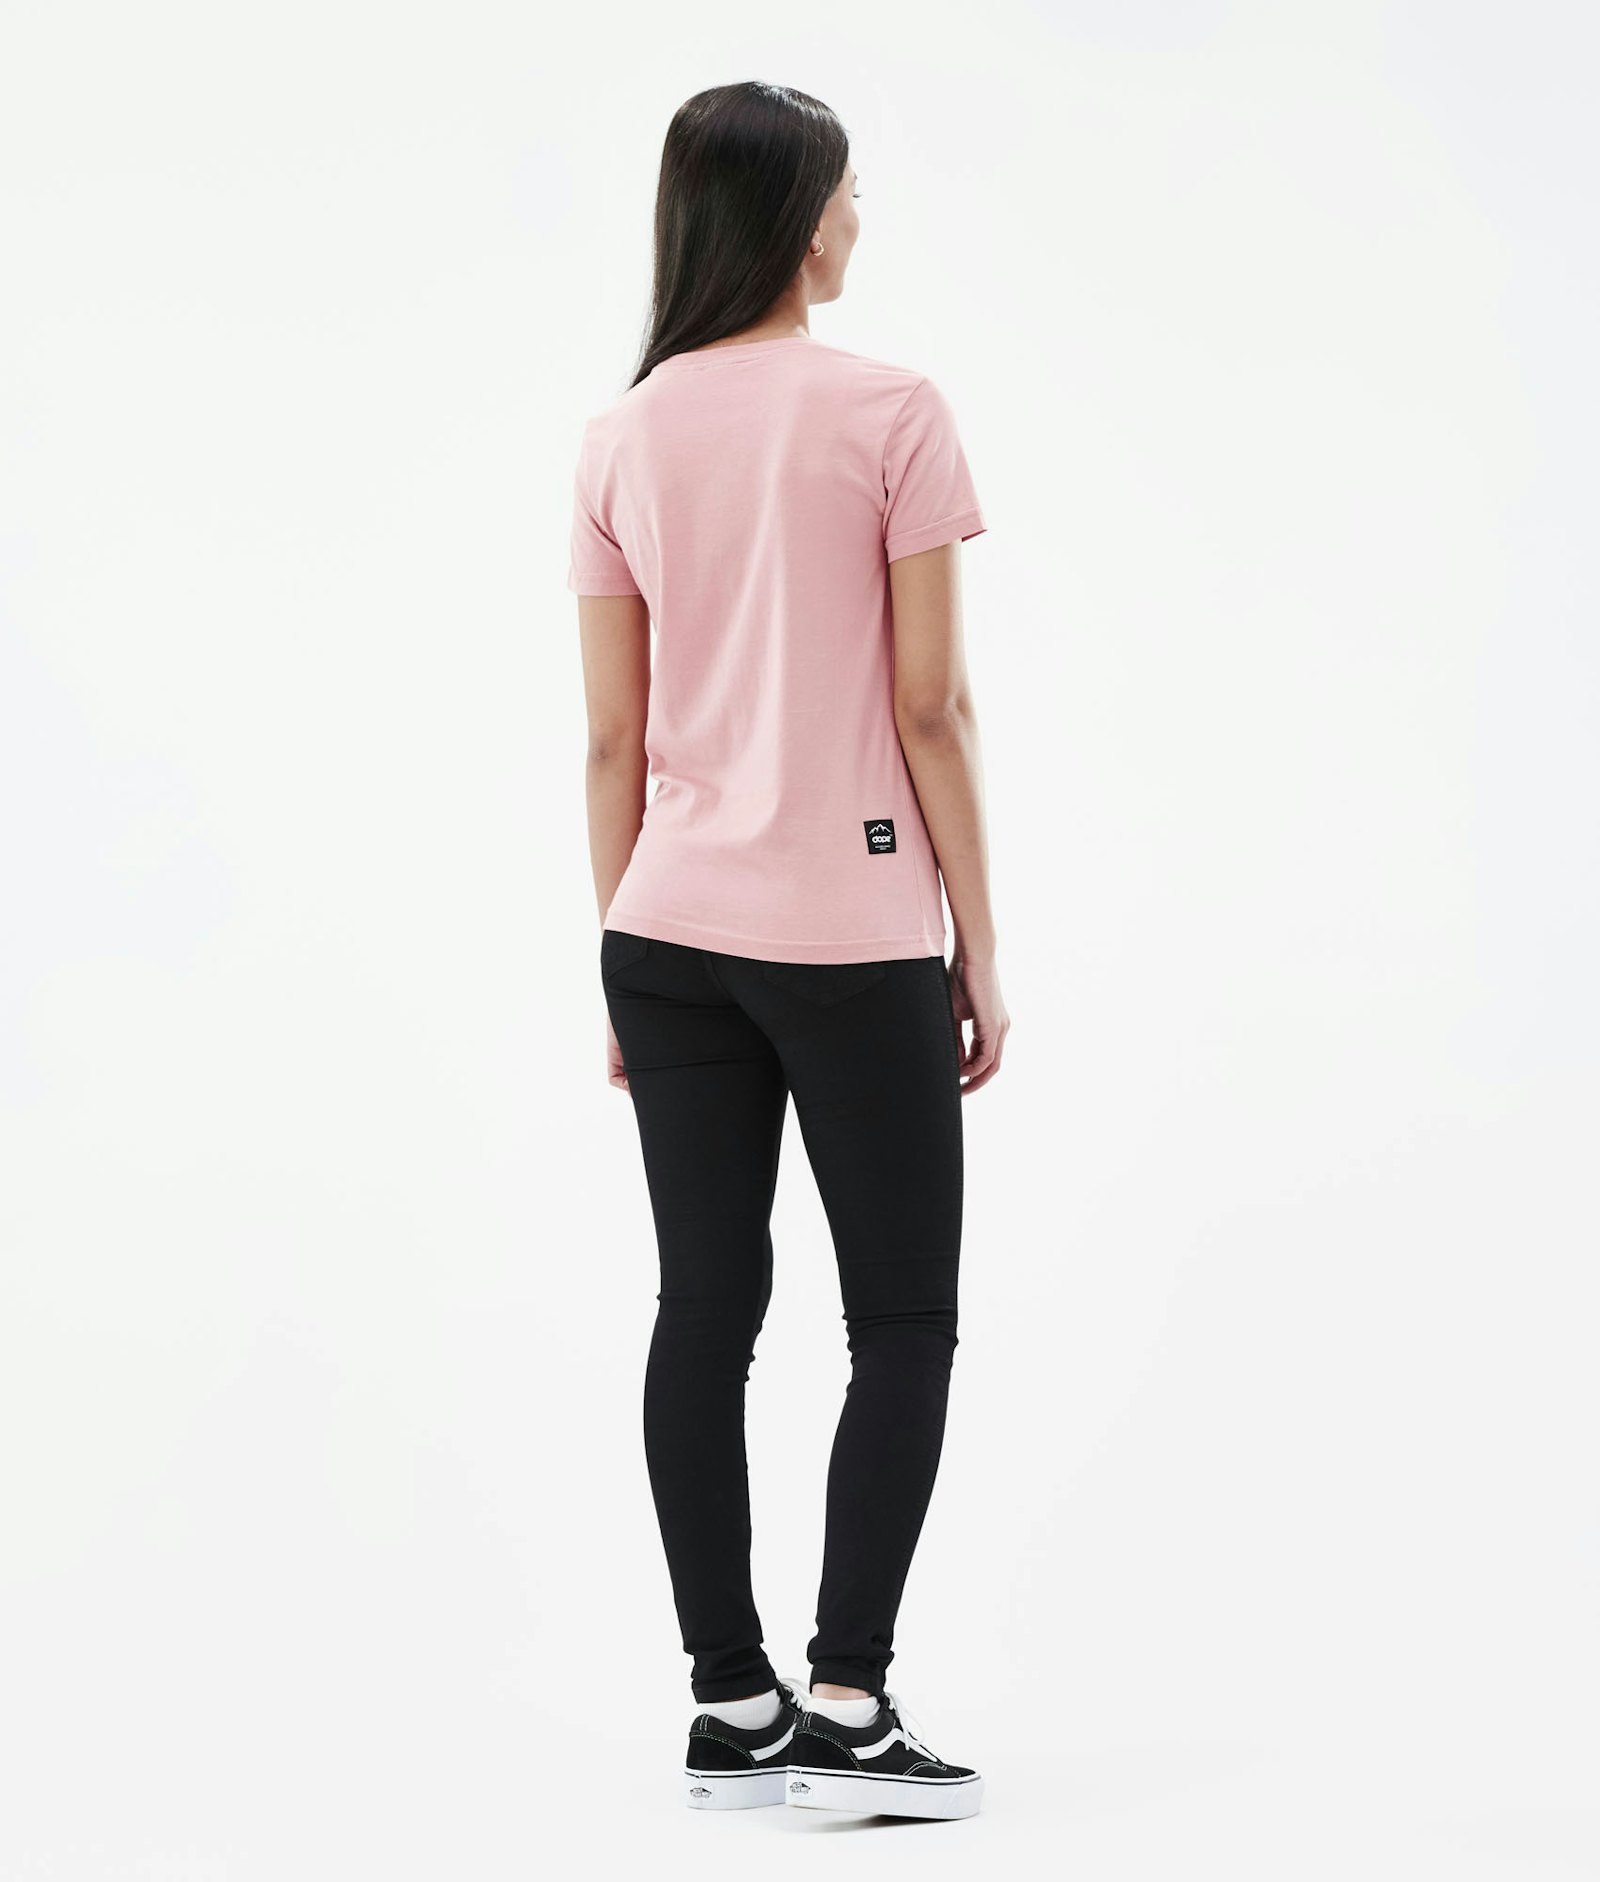 Copain 2X-UP Small T-shirt Dames Softpink